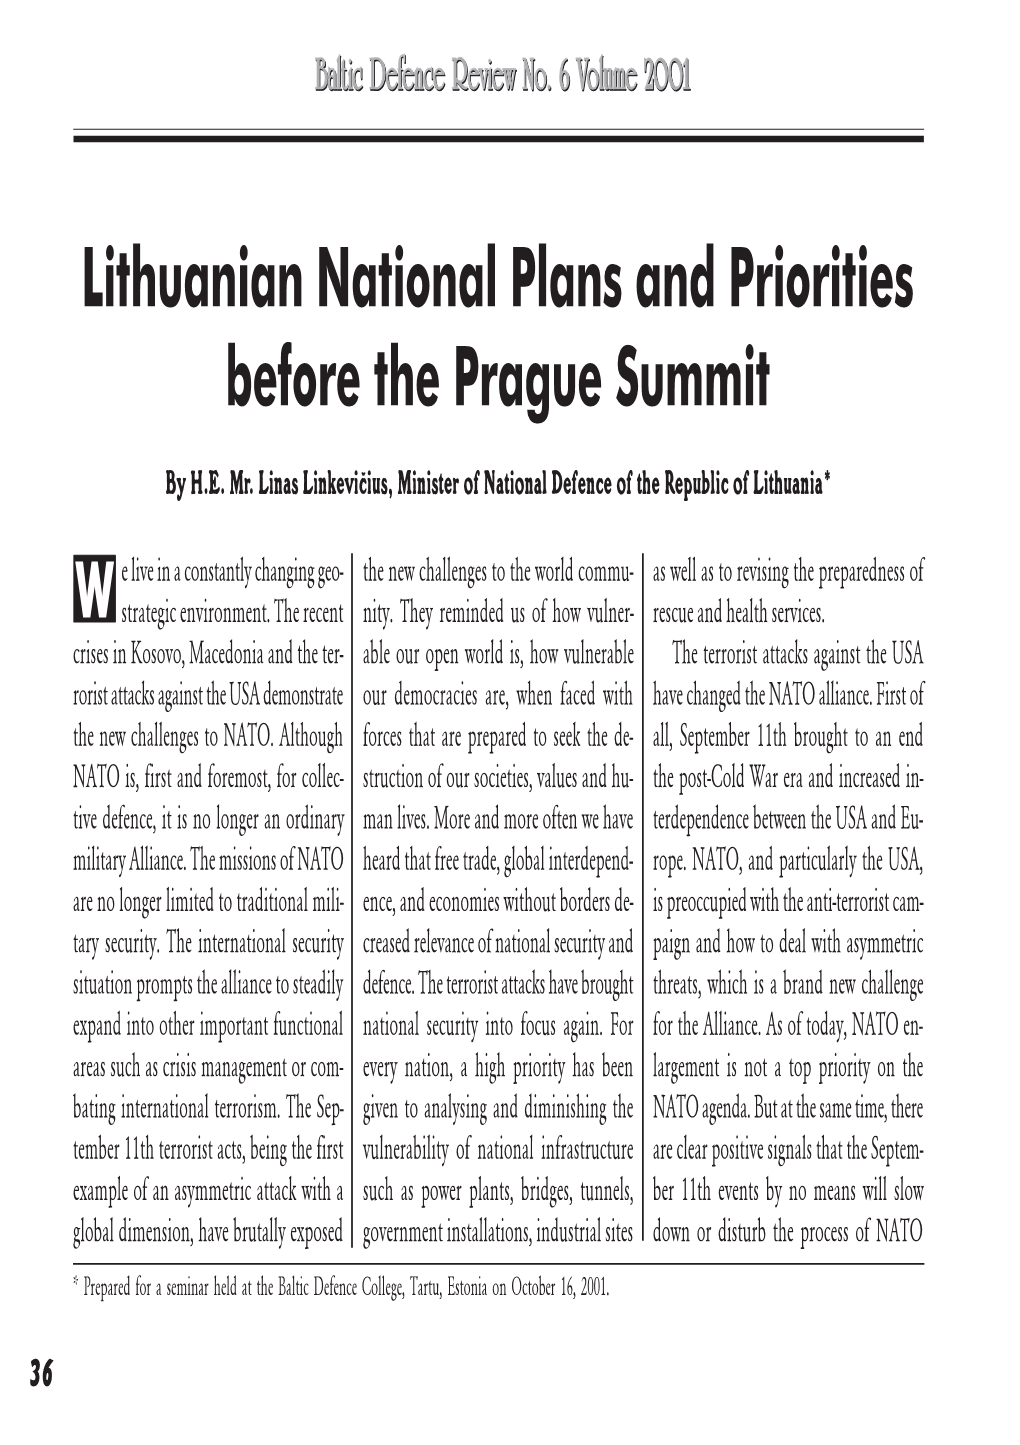 Lithuanian National Plans and Priorities Before the Prague Summit